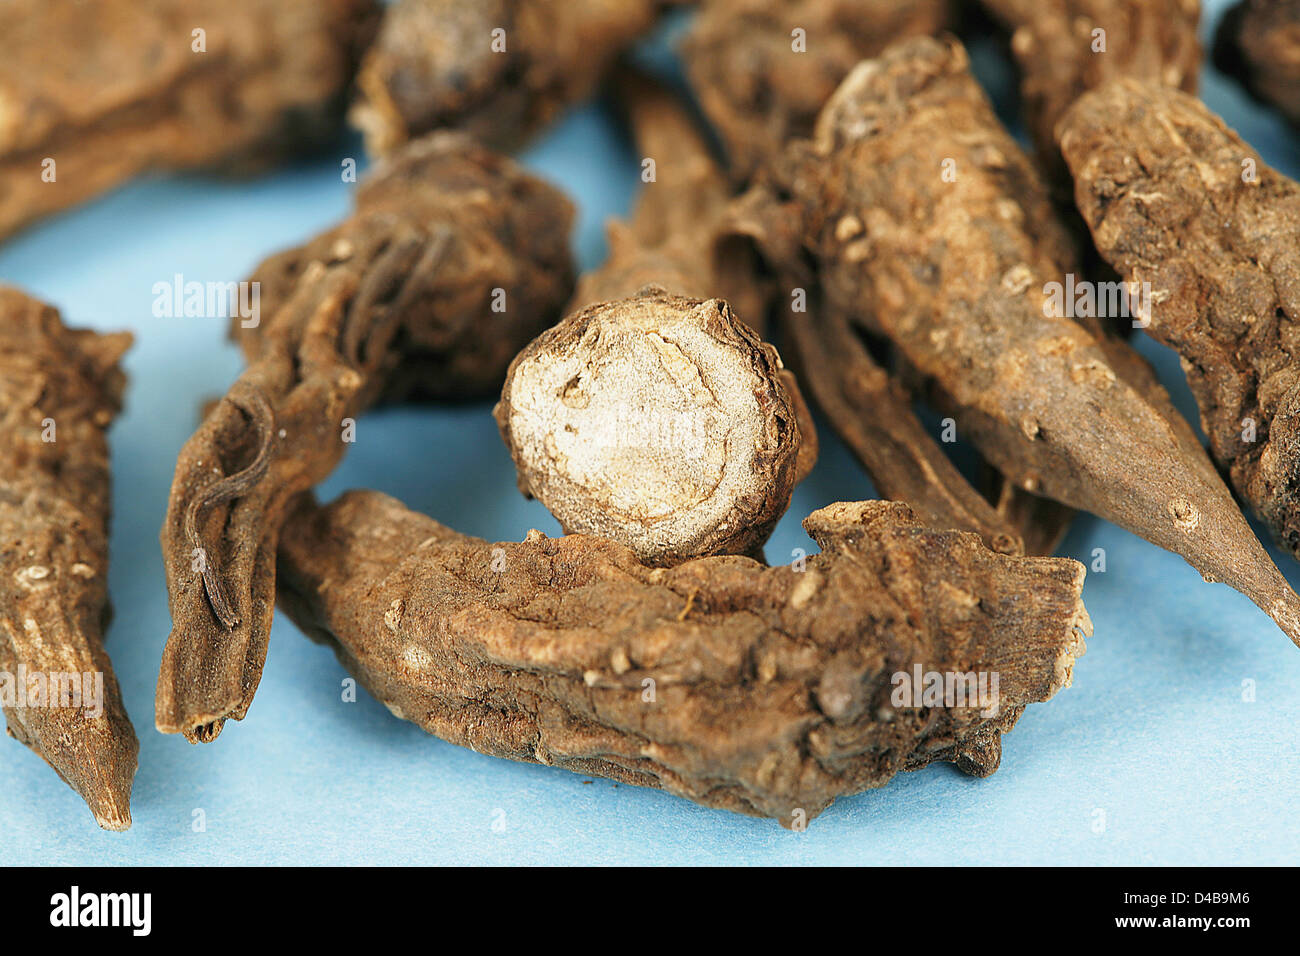 Aconite poisonous substance dried tuberous root Aconitum napellus contains acontine related alkaloids causes potentially fatal Stock Photo